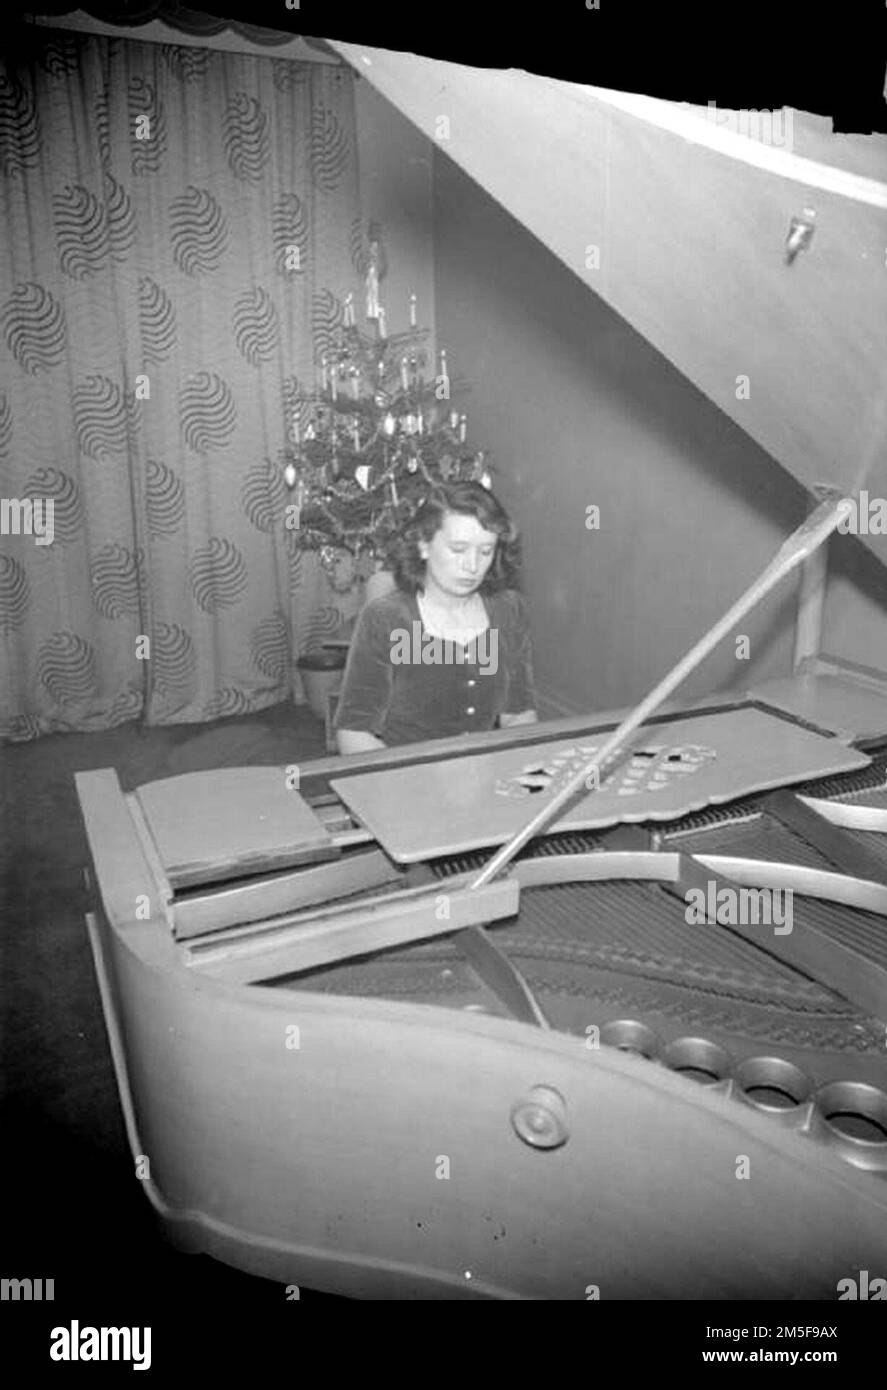 Dorothea Aspinall plays a grand piano at a small concert for American troops in a flat in Buckingham Gate, Westminster.  A Christmas tree decorated with candles can be clearly seen in the corner behind her. Stock Photo